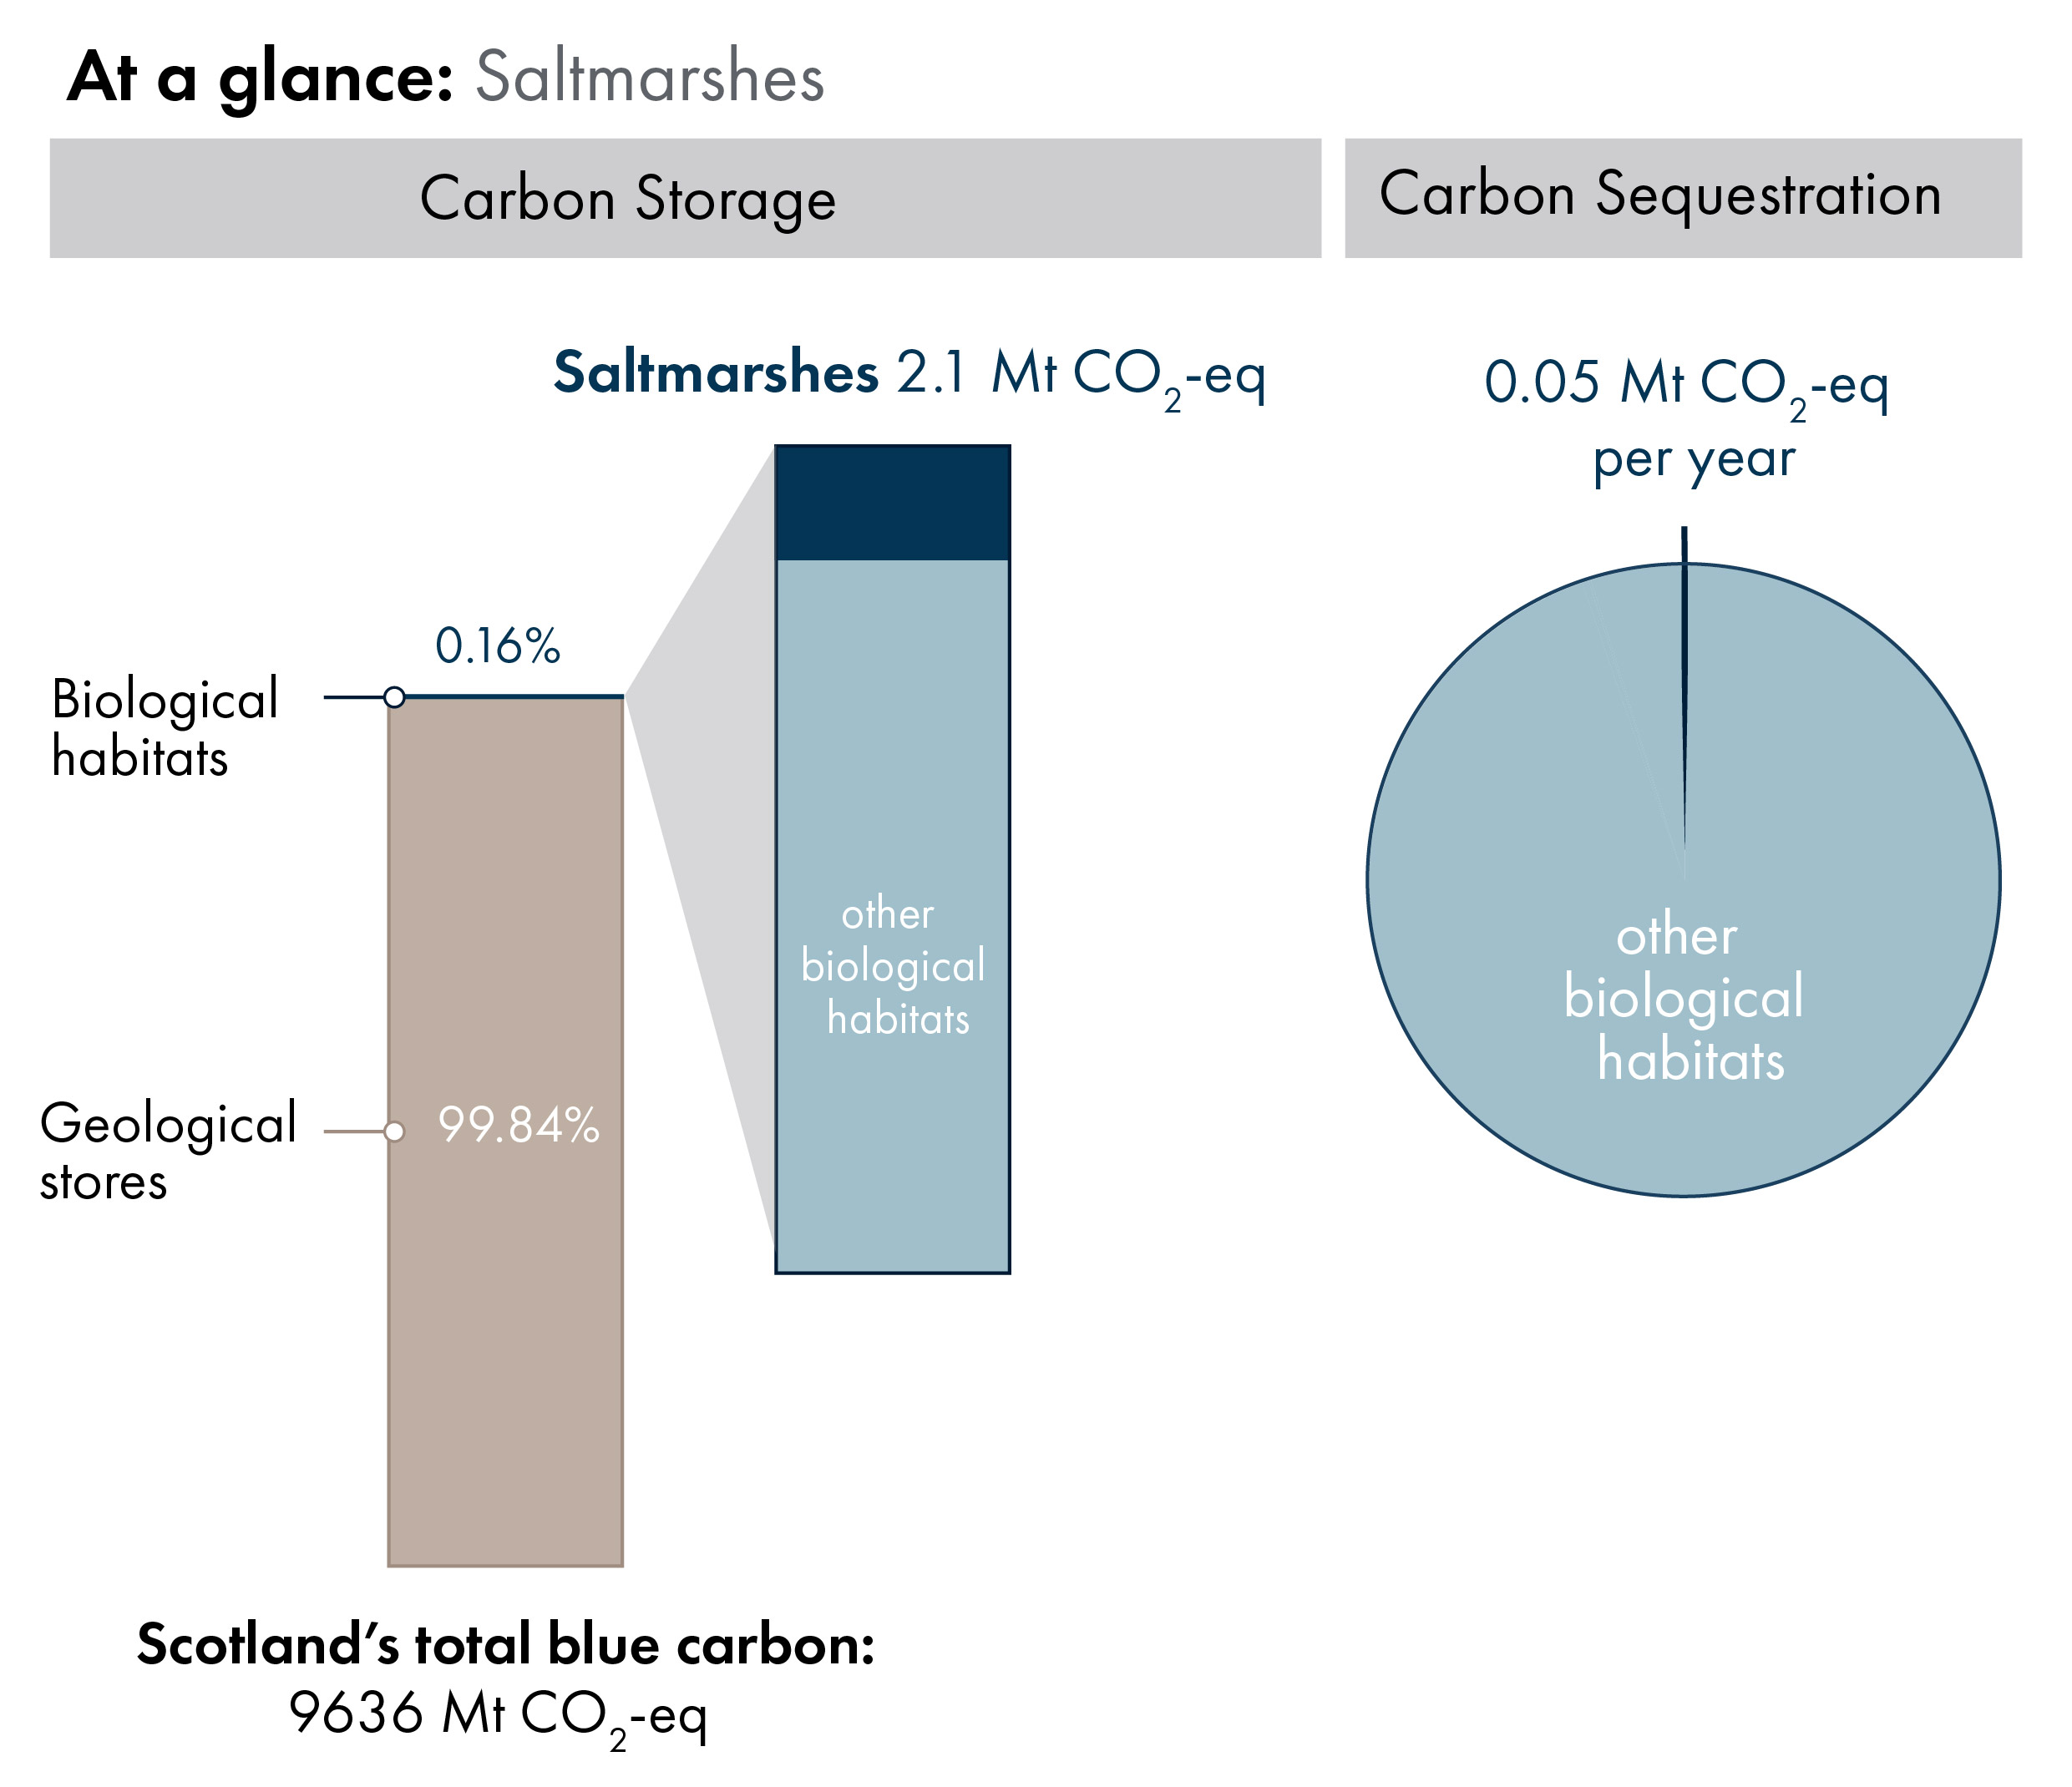 Bar charts showing the proportion of Scotland's blue carbon which is in geological stores (99.84%) versus carbon in biological habitats and species (0.16%). Inset bar chart shows the proportion of carbon in biological habitats which is saltmarsh carbon storage (2.1 megatonnes of carbon dioxide equivalent). Pie chart showing, out of all biological habitats, the proportion which is sequestered annually by saltmarshes.